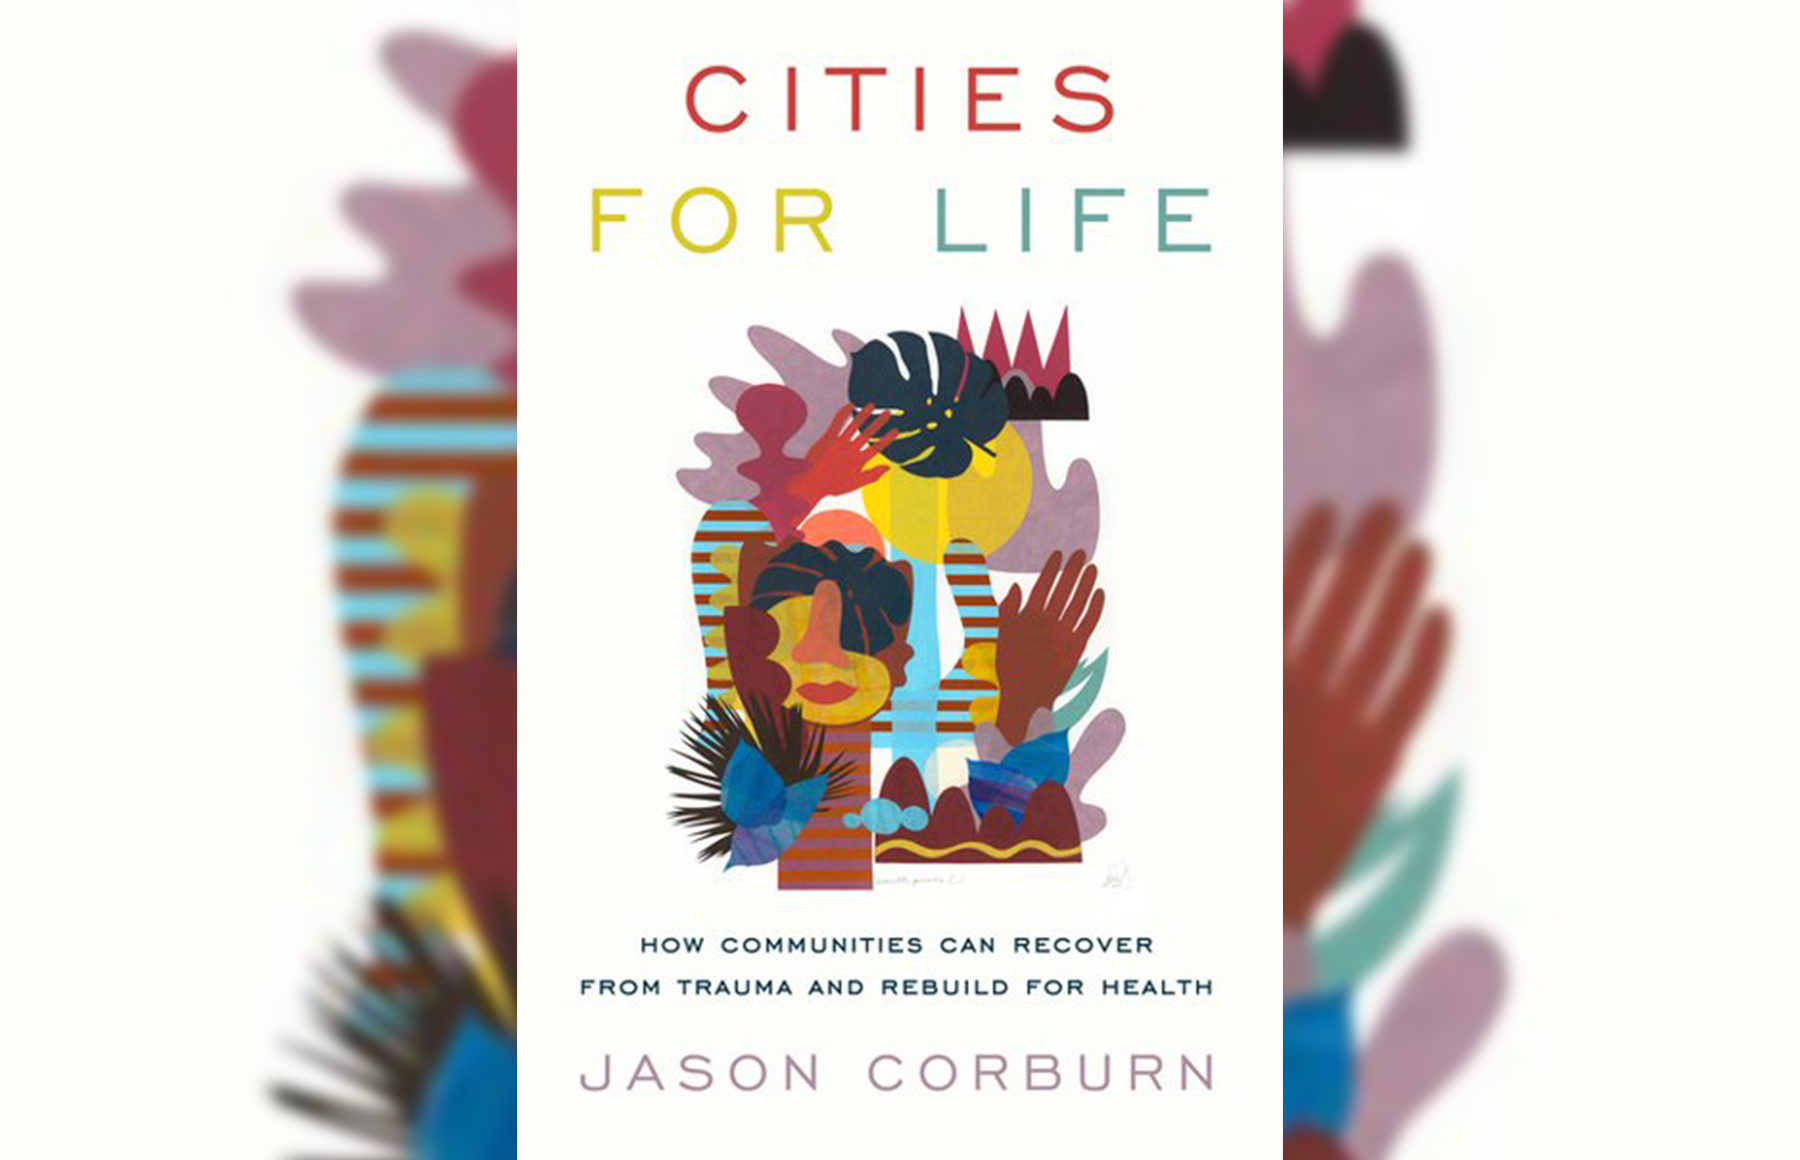 Jason Corburn wins the Great Places Book Award, 2022